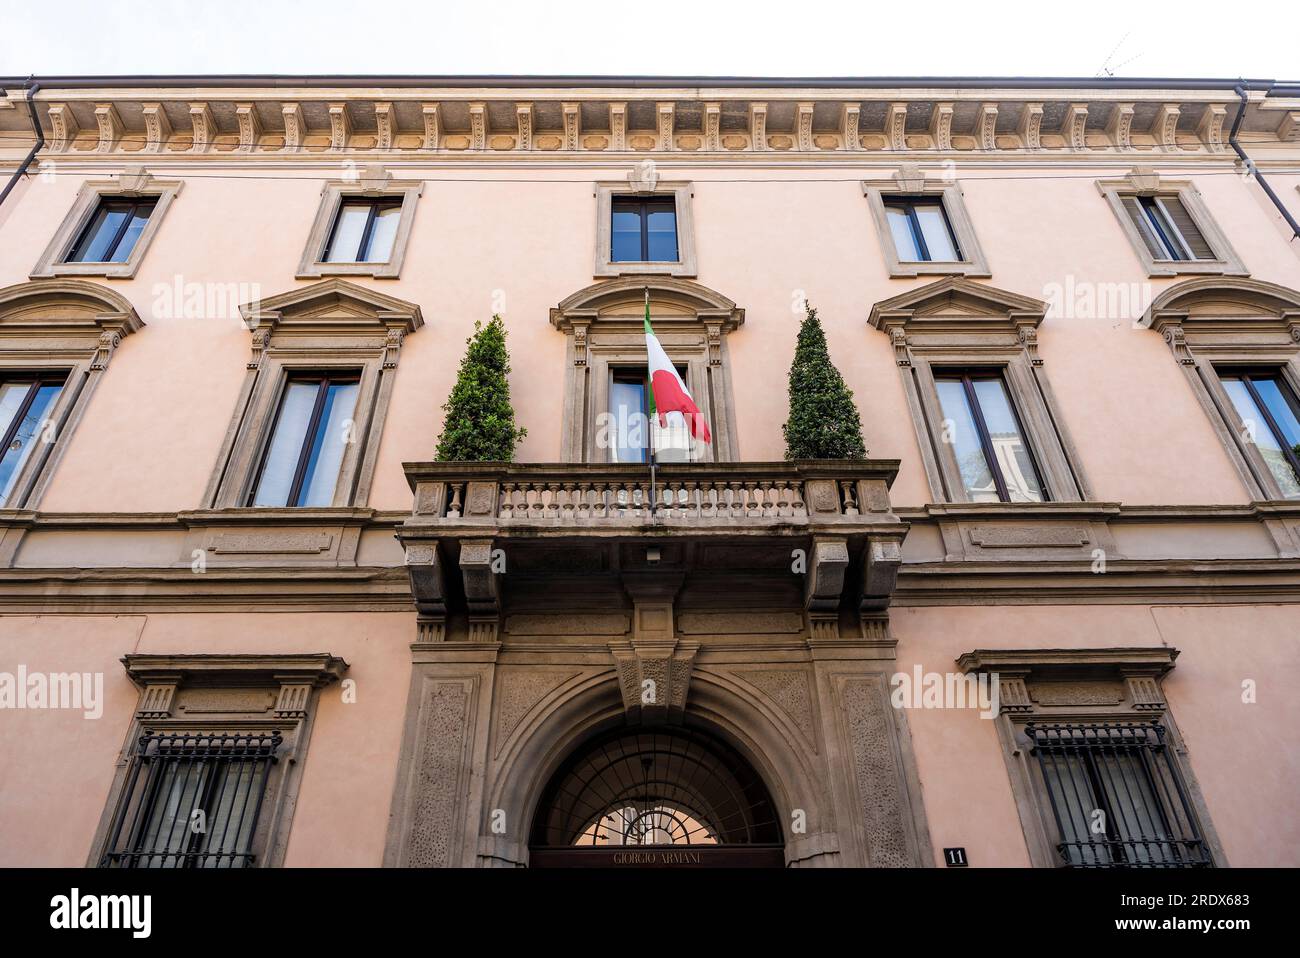 Palazzo Orsini, neoclassic-style palace built in the 17th century, now owned by Giorgio Armani Spa, in via Borgonuovo, in Milano, Italy Stock Photo